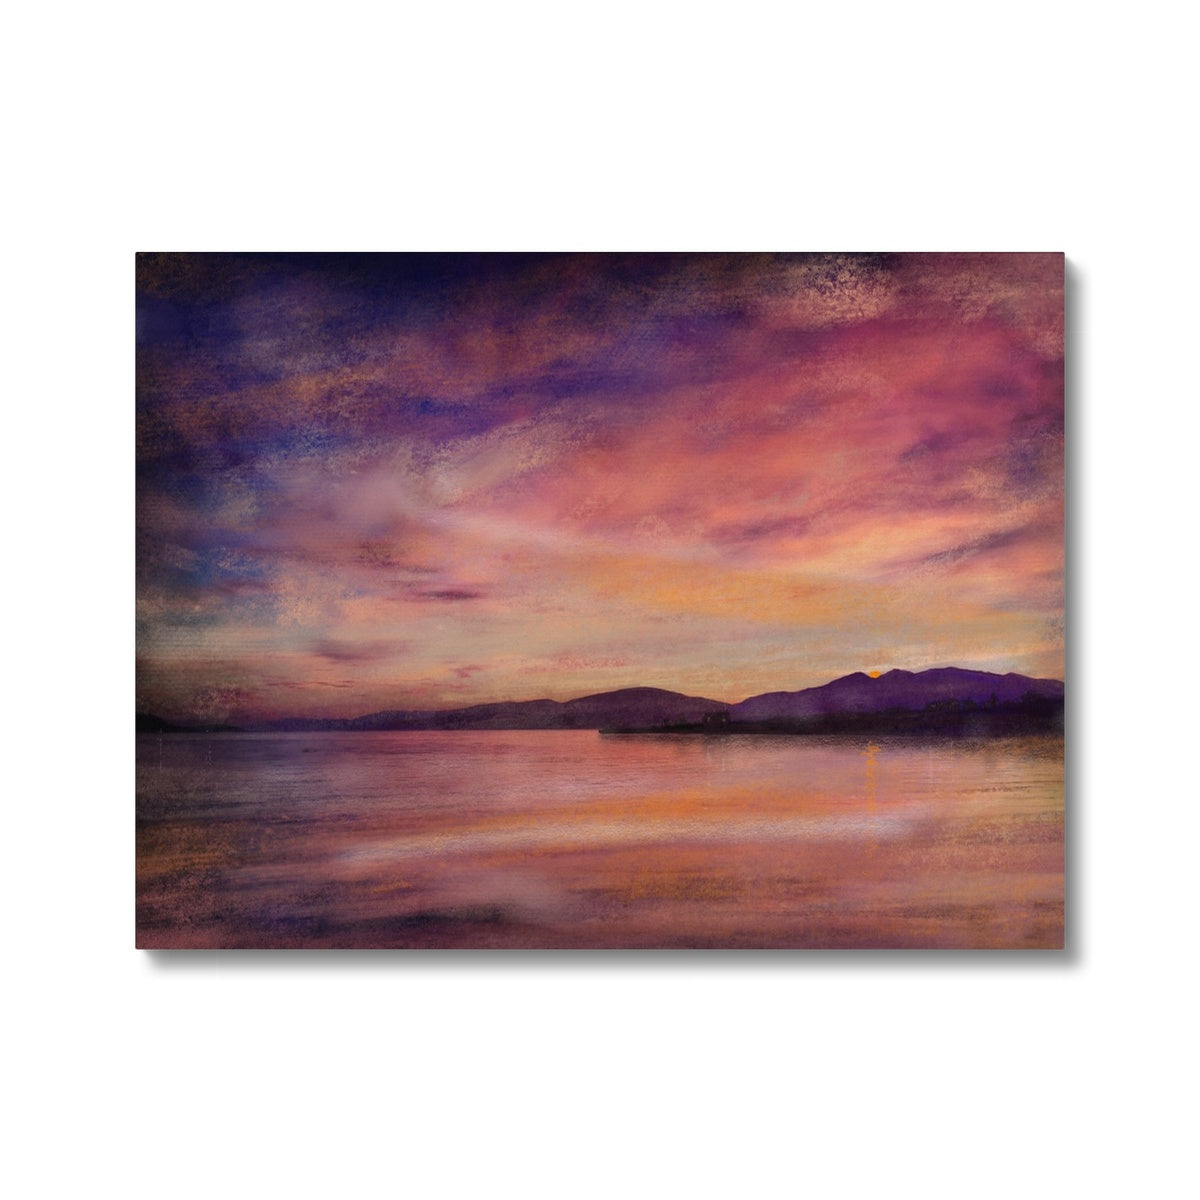 Loch Linnhe Dusk Painting | Canvas From Scotland-Contemporary Stretched Canvas Prints-Scottish Lochs & Mountains Art Gallery-24"x18"-Paintings, Prints, Homeware, Art Gifts From Scotland By Scottish Artist Kevin Hunter